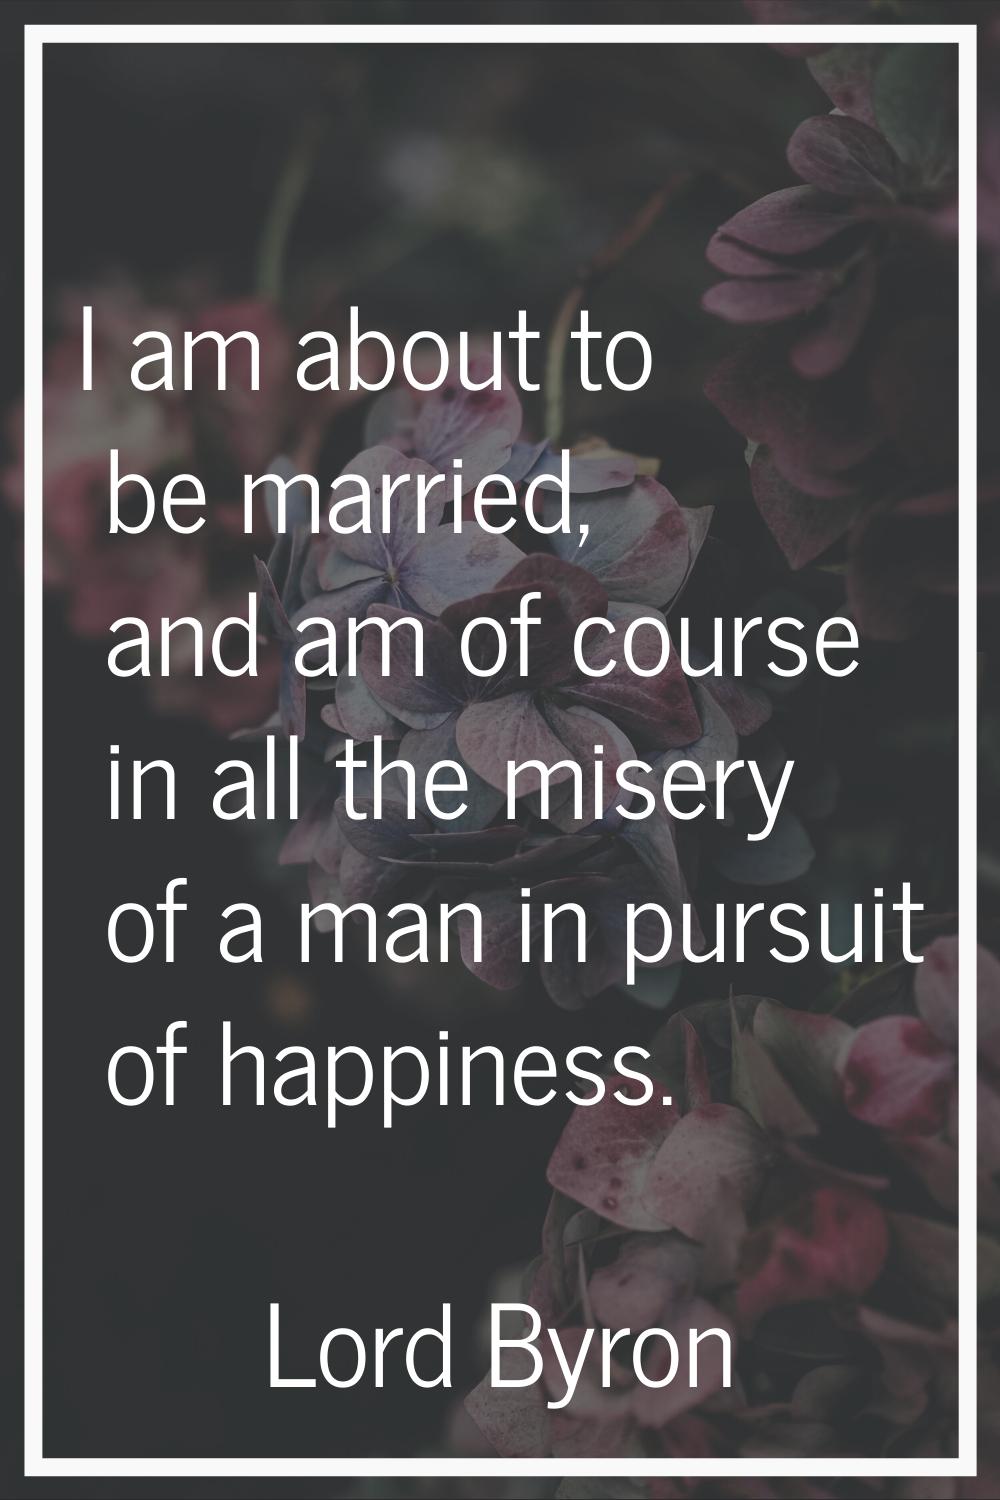 I am about to be married, and am of course in all the misery of a man in pursuit of happiness.